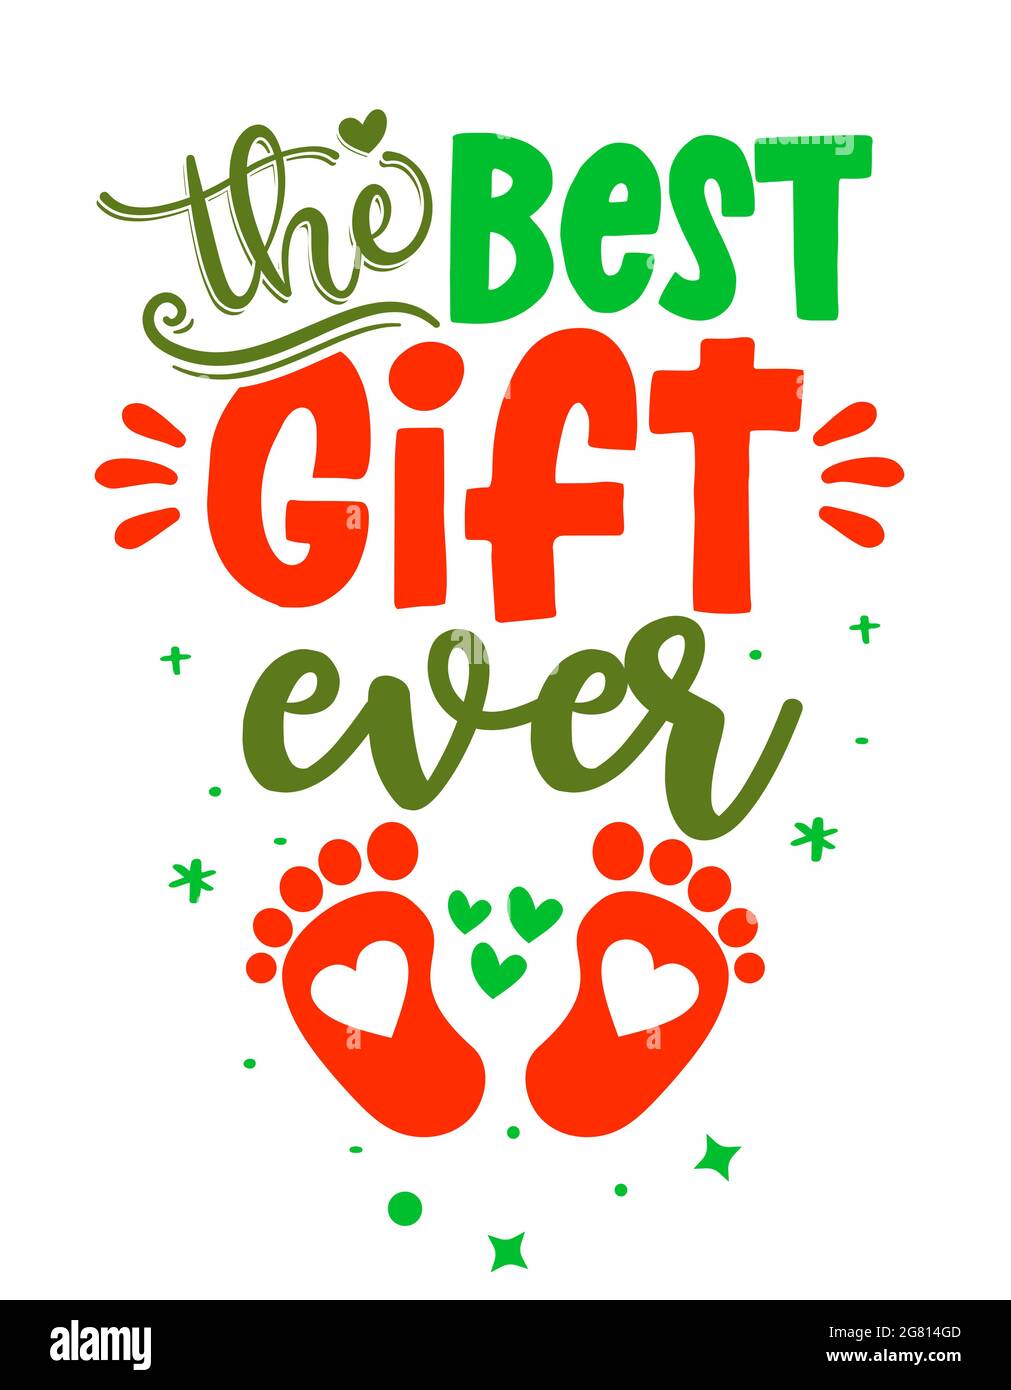 https://c8.alamy.com/comp/2G814GD/the-best-gift-ever-phrase-for-christmas-baby-sweaters-hand-drawn-lettering-for-xmas-greetings-cards-invitations-good-for-t-shirt-mug-gift-prin-2G814GD.jpg